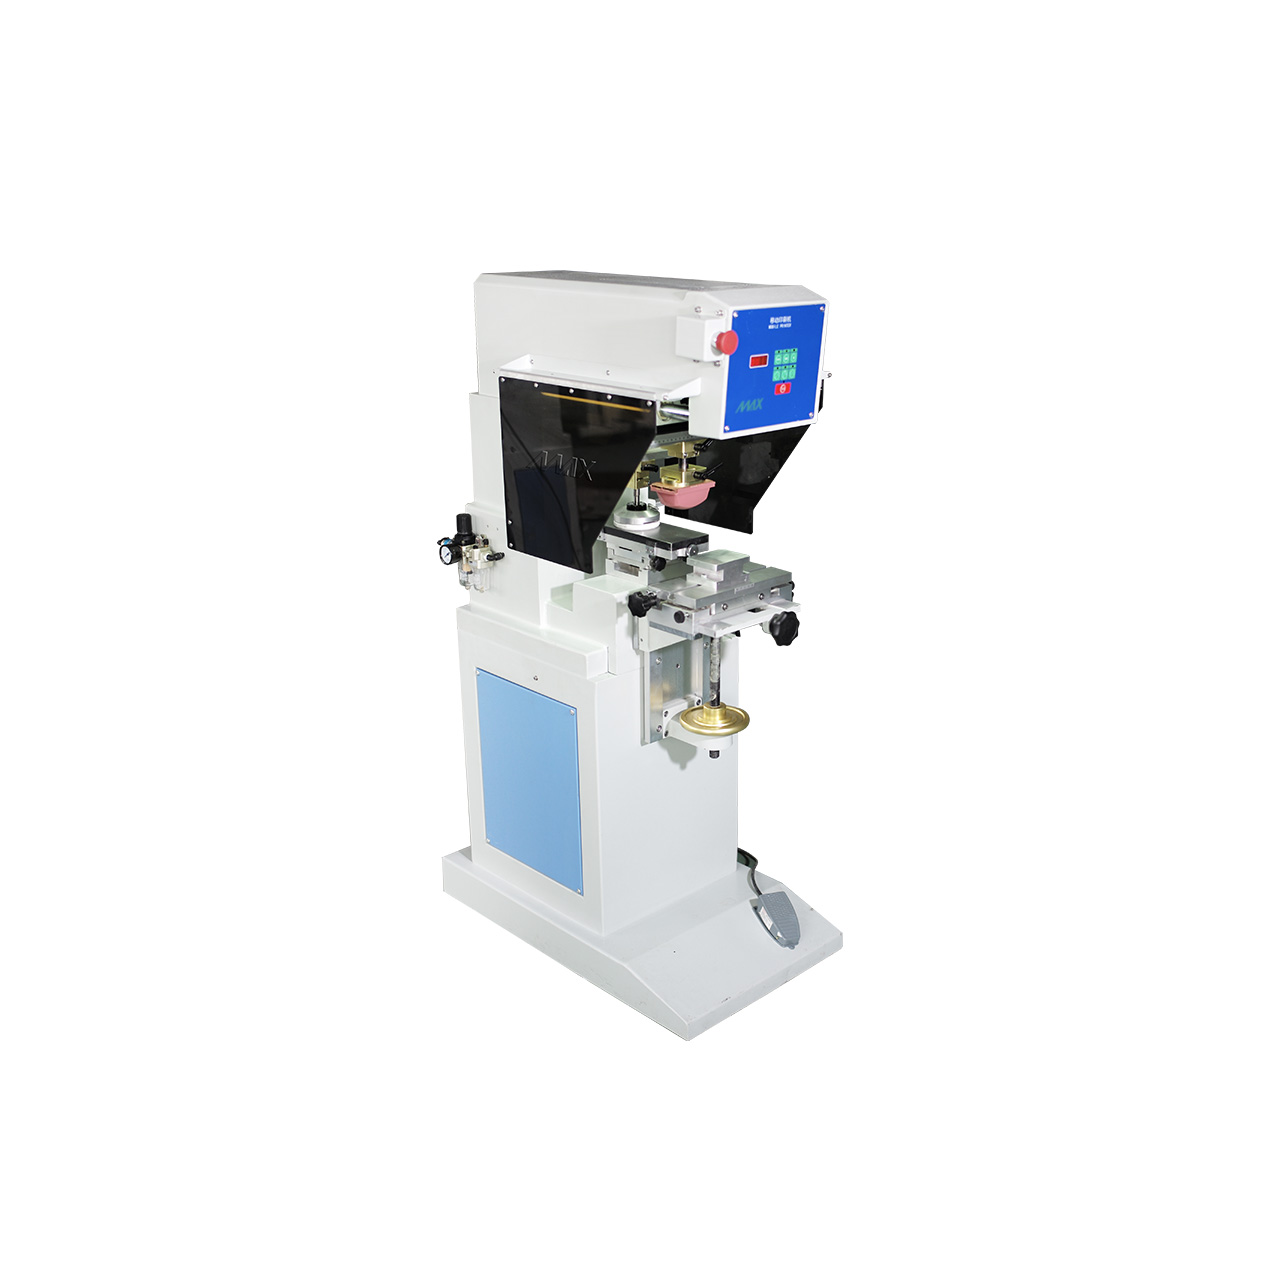 Max L1005914 Printing Machine - Technostitch sewing machines Cairo, Egypt - Product images